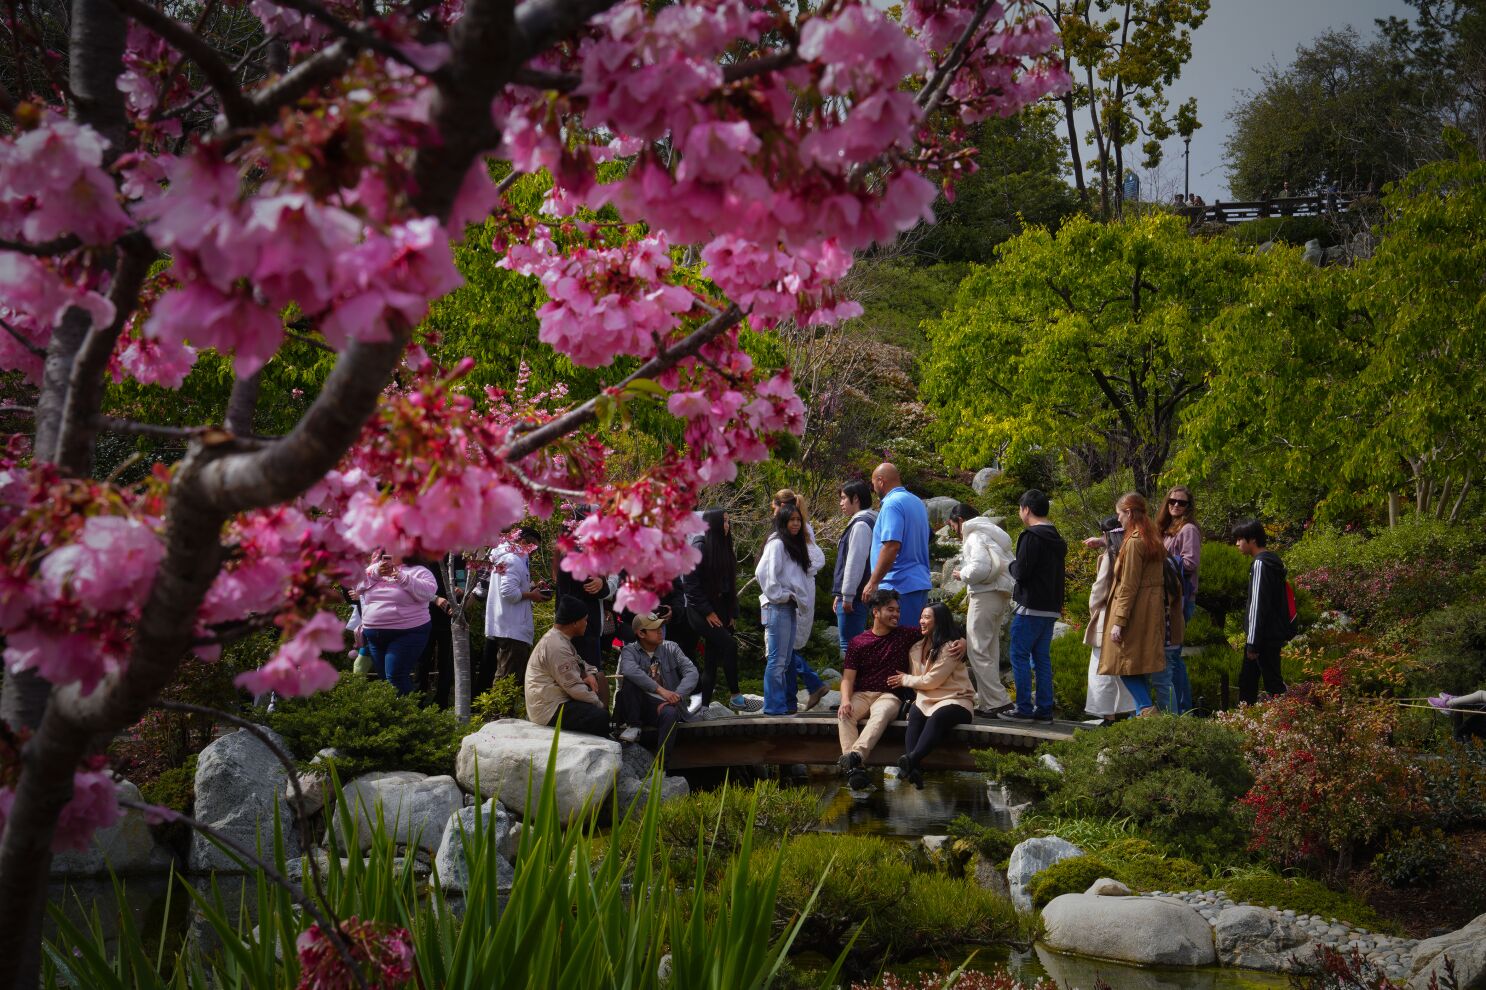 San Diego, CA - March 11: At the Cherry Blossom Festival held at Japanese Friendship Garden on Saturday, March 11, 2023 in San Diego, CA., Darryl Obdianela and Laura Obdianela (seated up front) took time to sit and enjoy the cherry blossoms. (Nelvin C. Cepeda / The San Diego Union-Tribune)